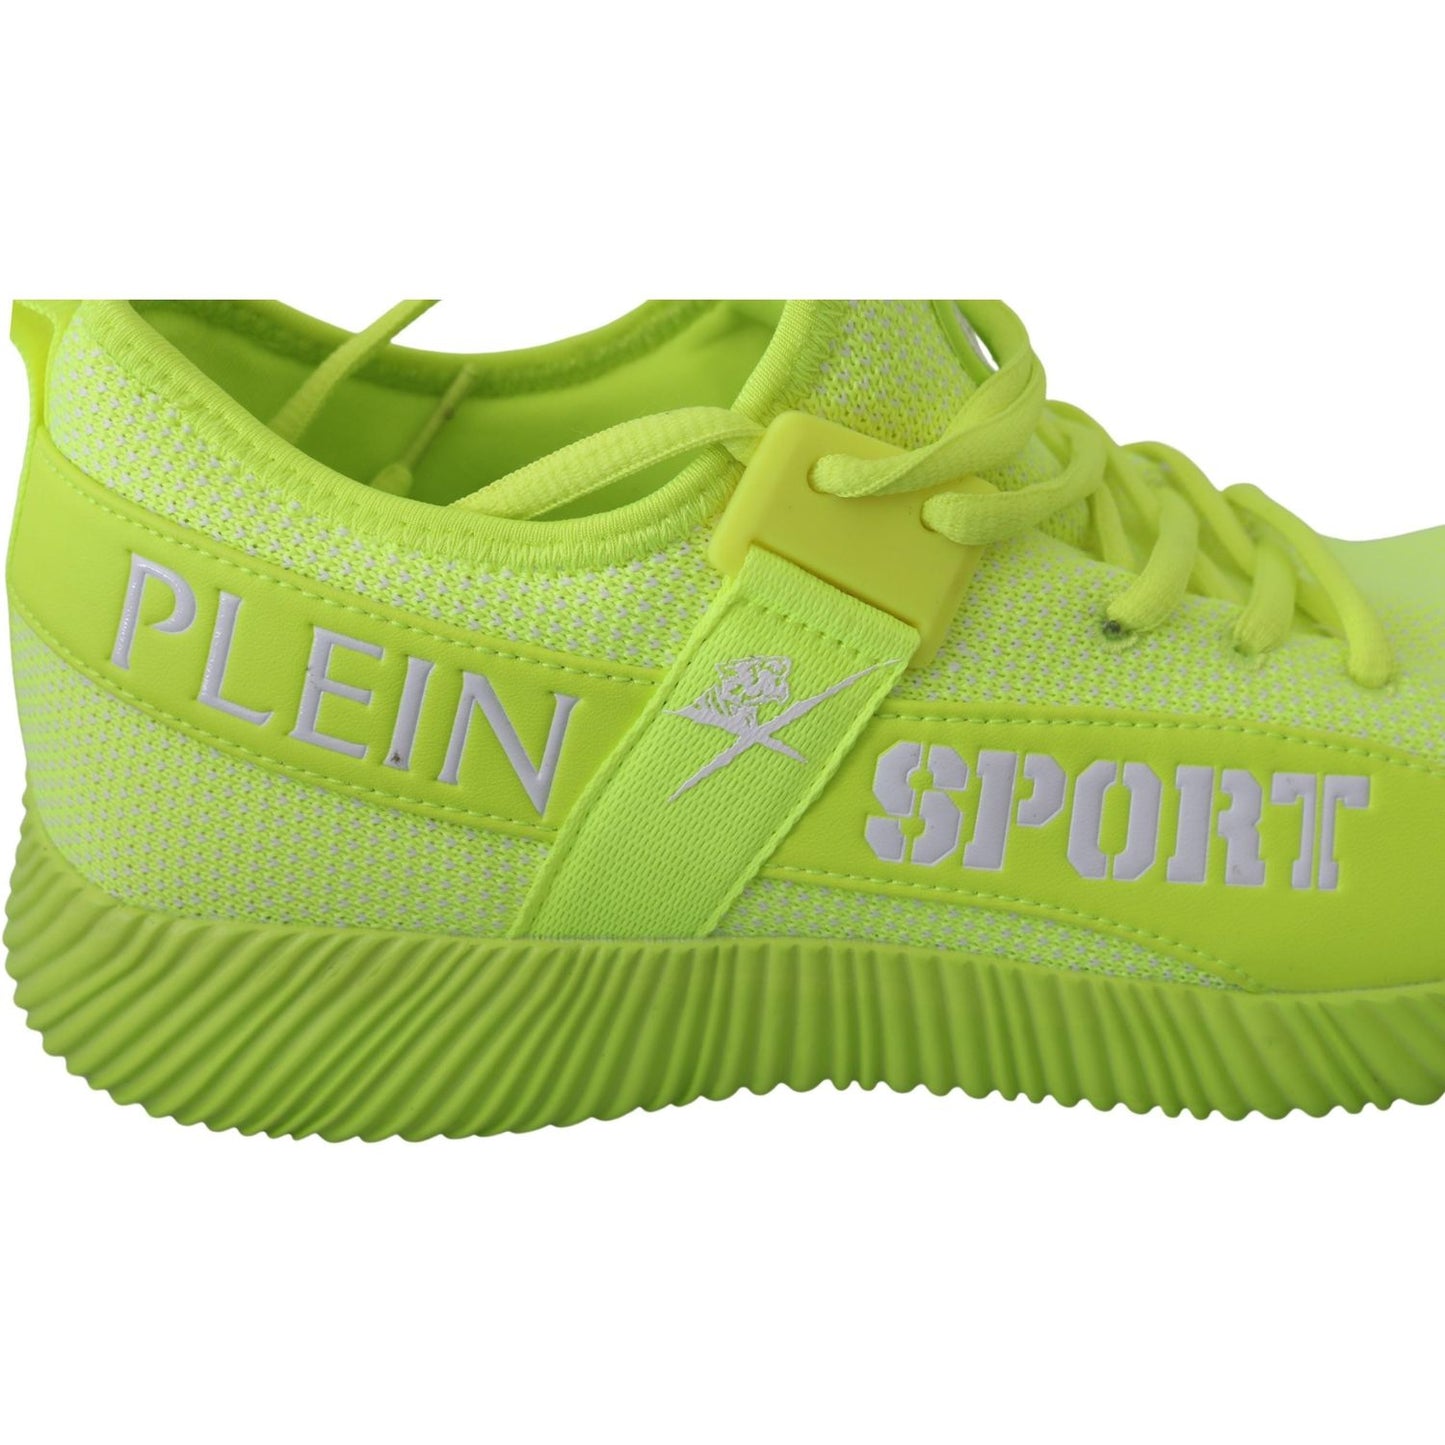 Philipp Plein Stylish Light Green Casual Sneakers green-carter-logo-hi-top-sneakers-shoes MAN SNEAKERS IMG_7552-scaled-d138abc4-84c.jpg